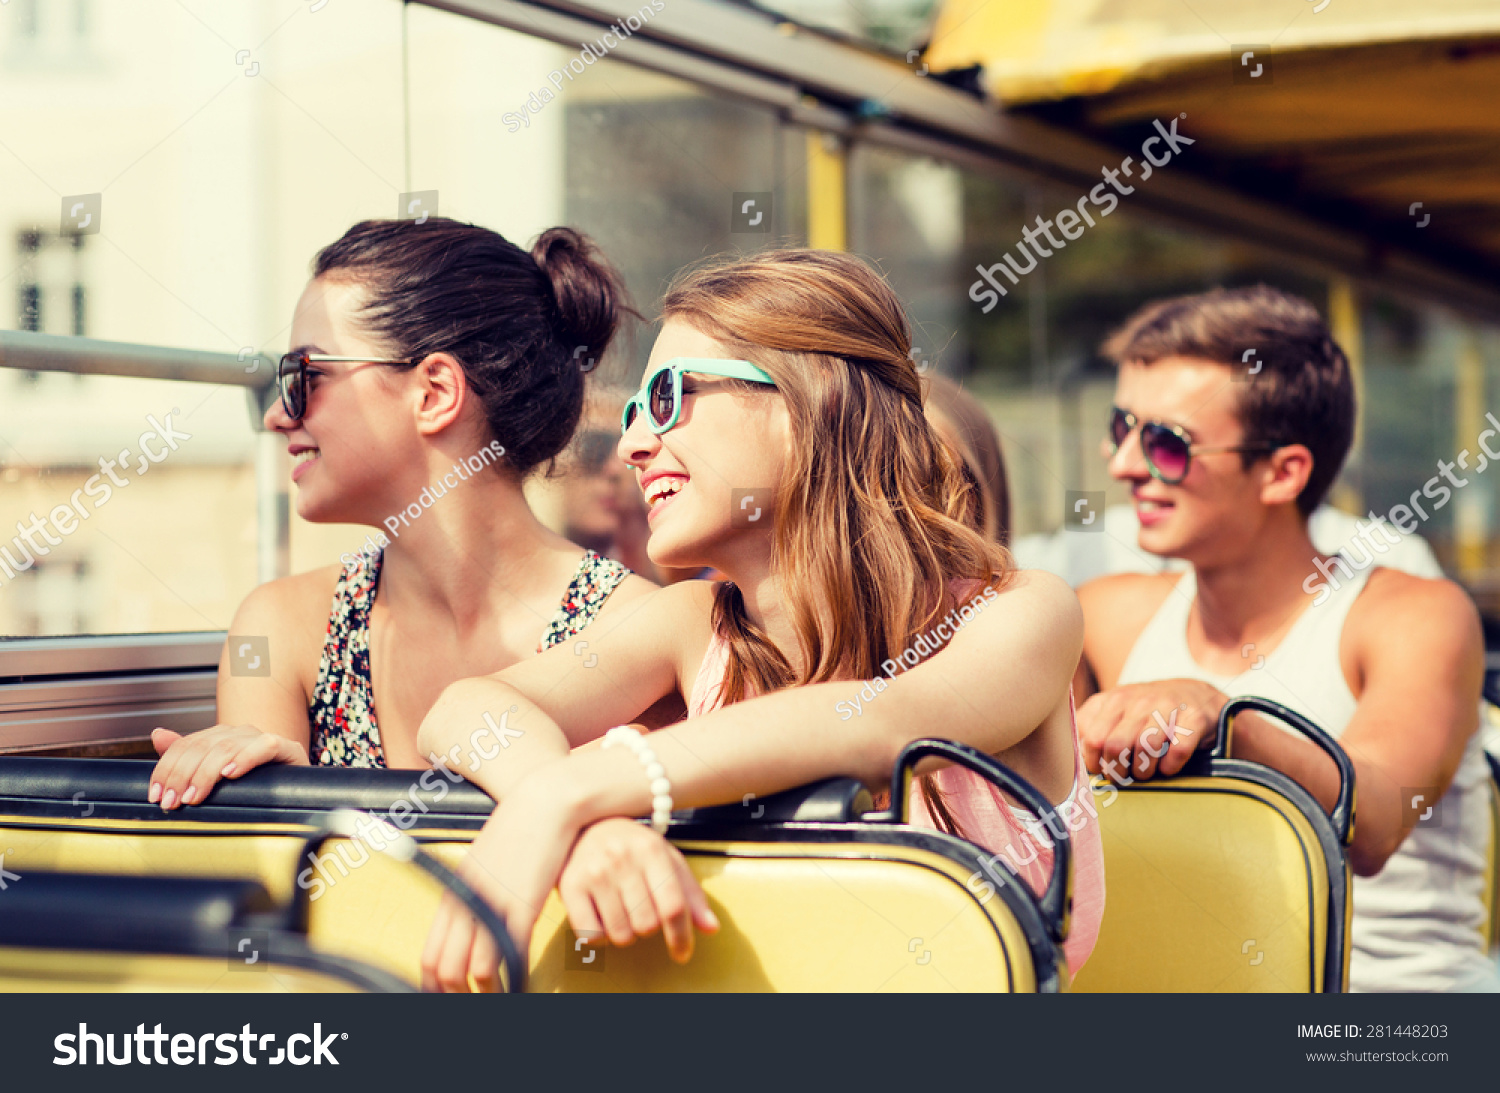 friendship, travel, vacation, summer and people concept - group of smiling friends traveling by tour bus #281448203